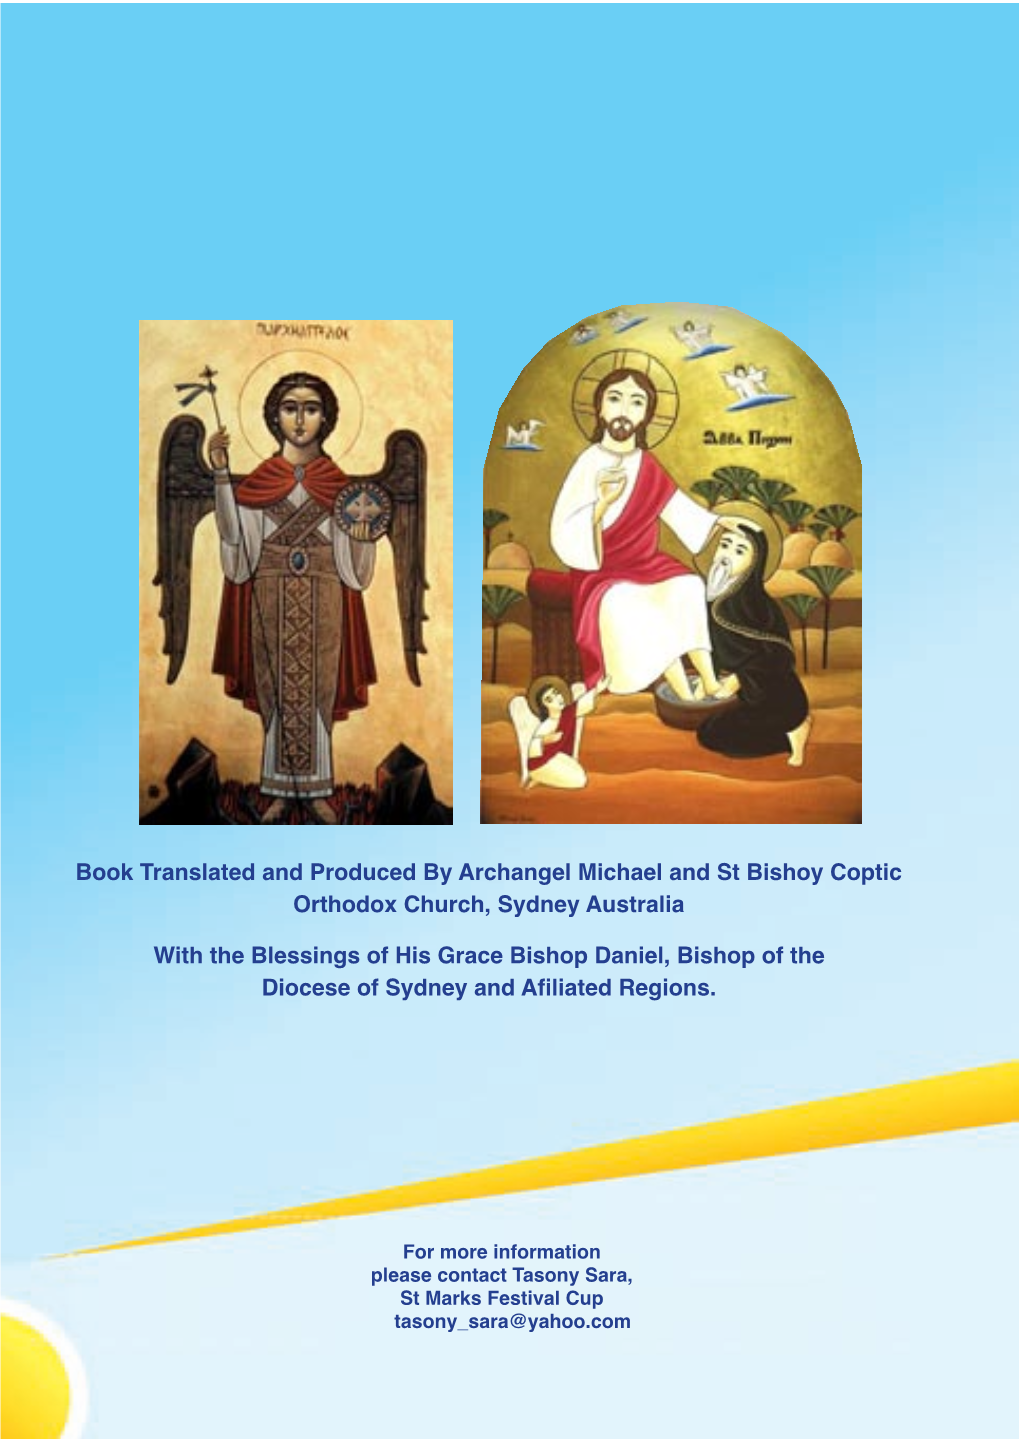 Book Translated and Produced by Archangel Michael and St Bishoy Coptic Orthodox Church, Sydney Australia